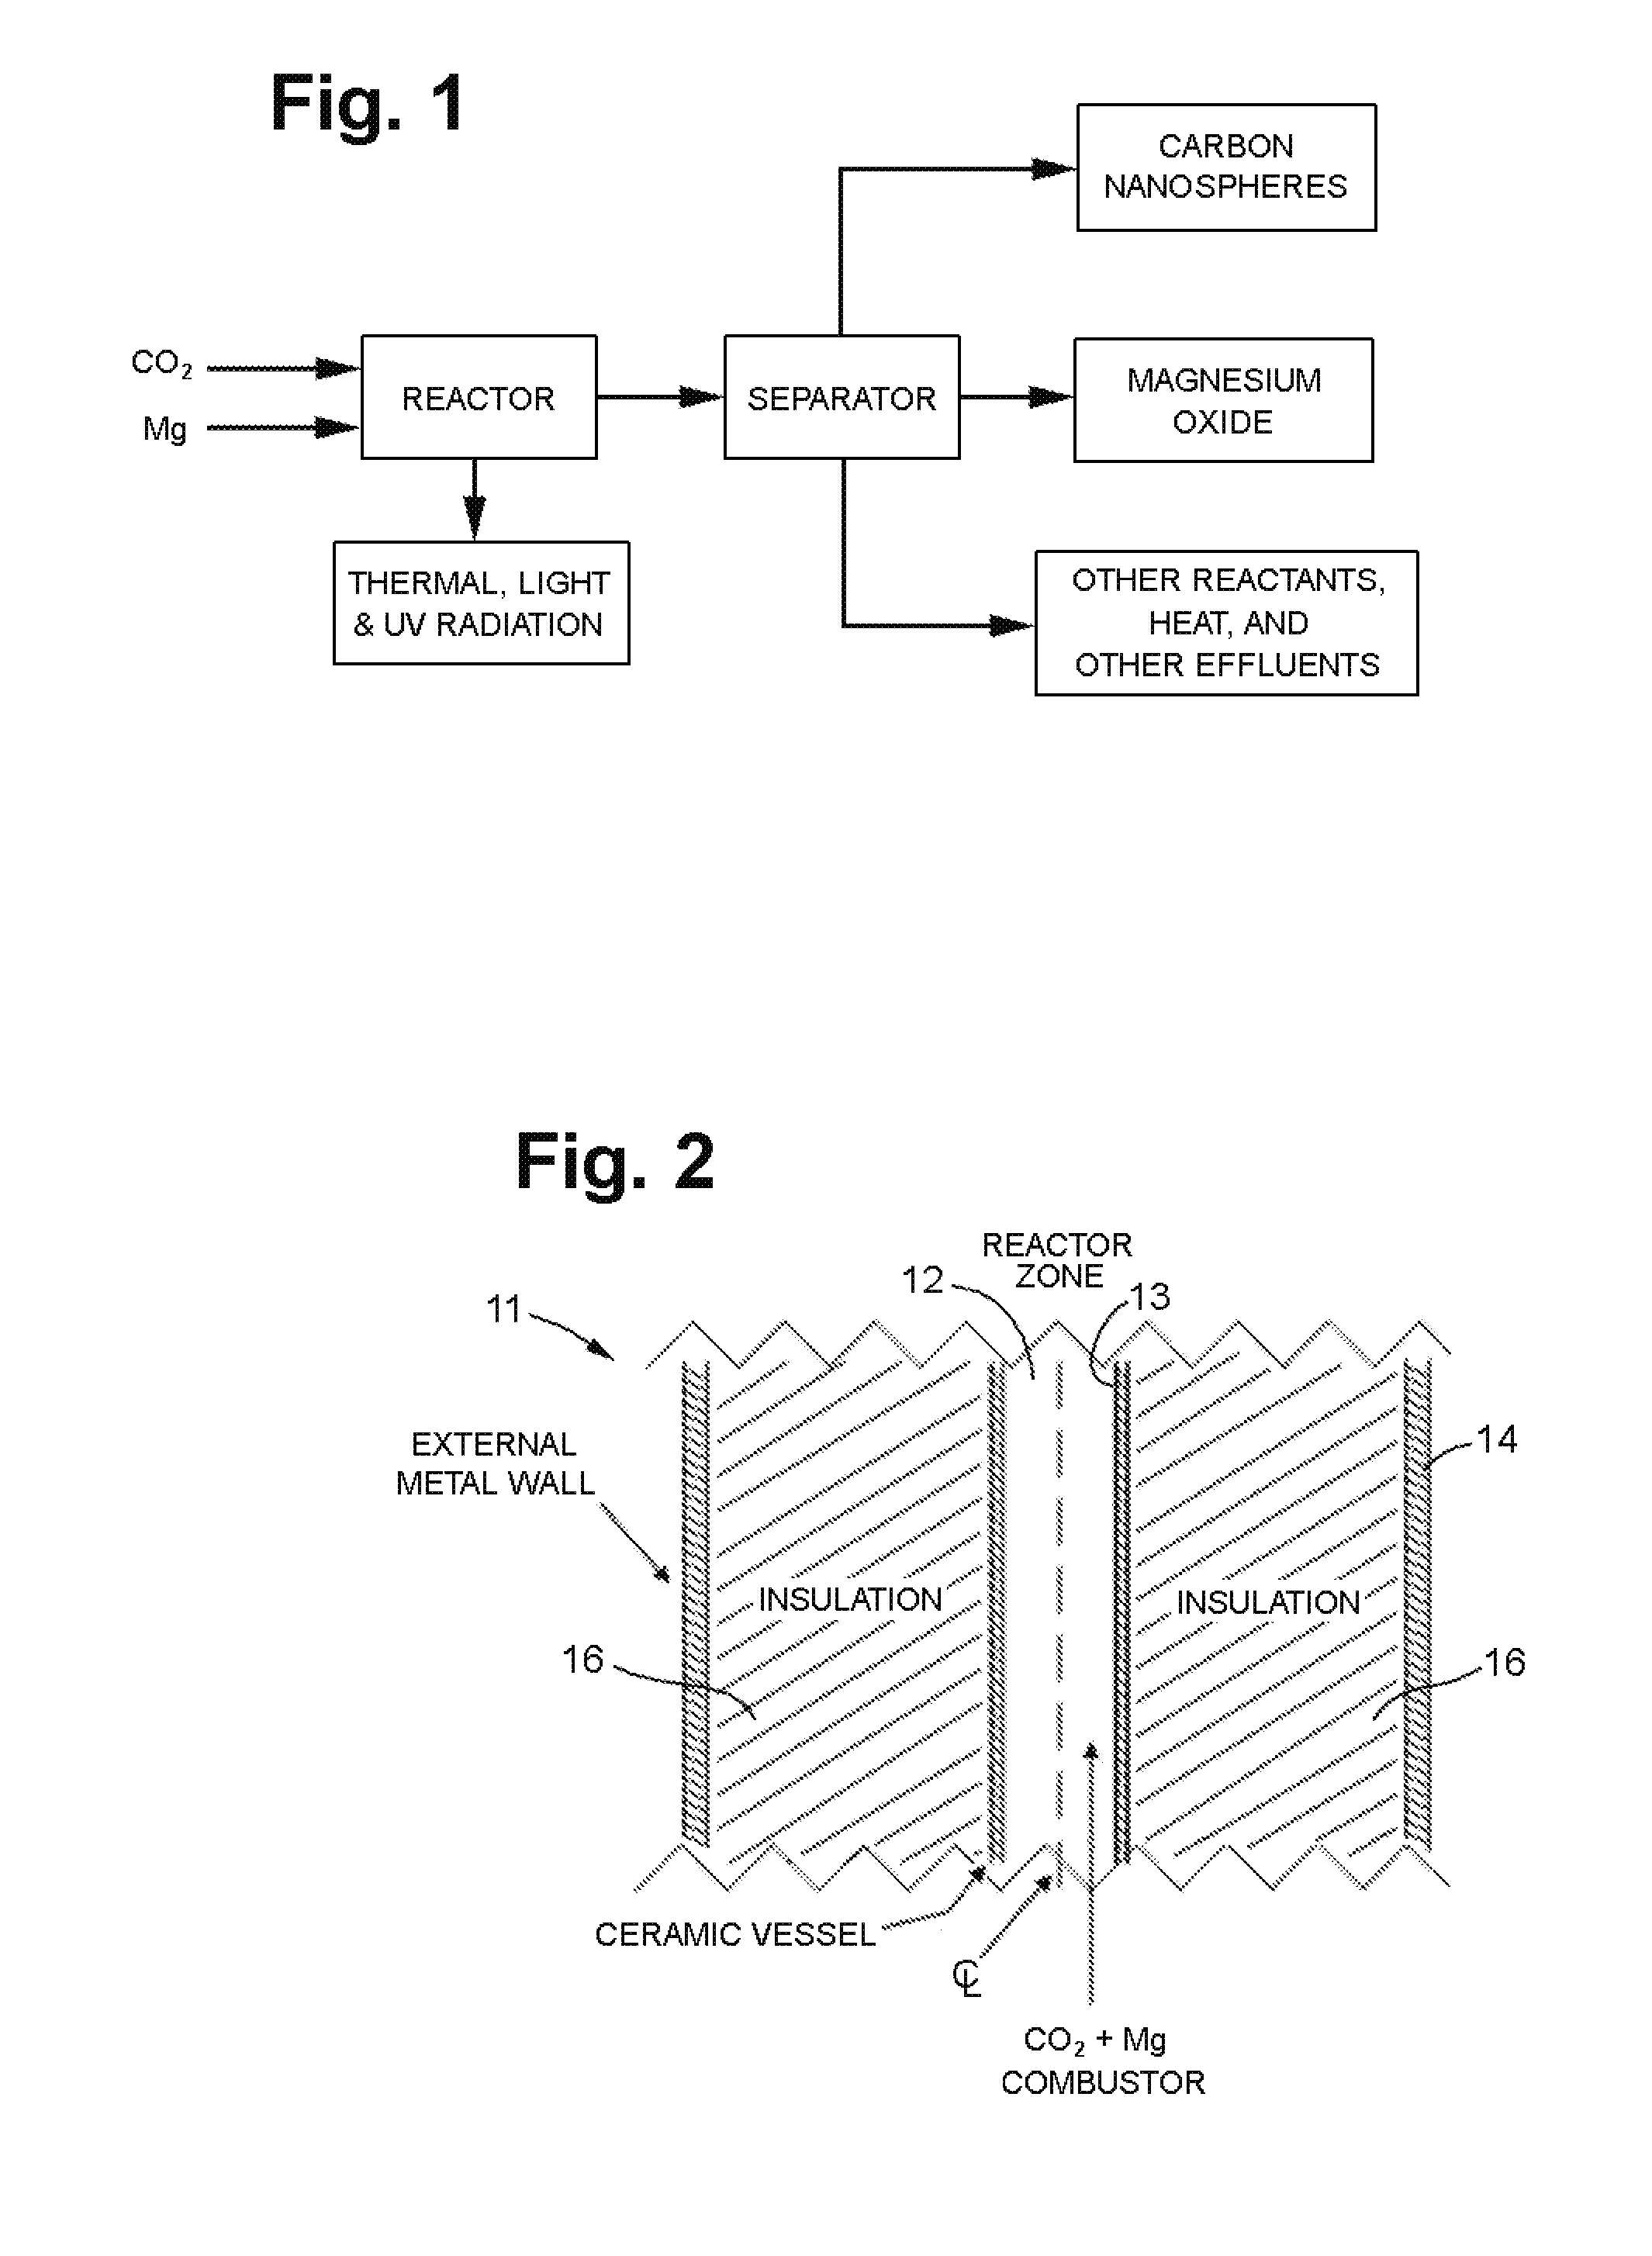 Process for the Production of Carbon Nanospheres and Sequestration of Carbon